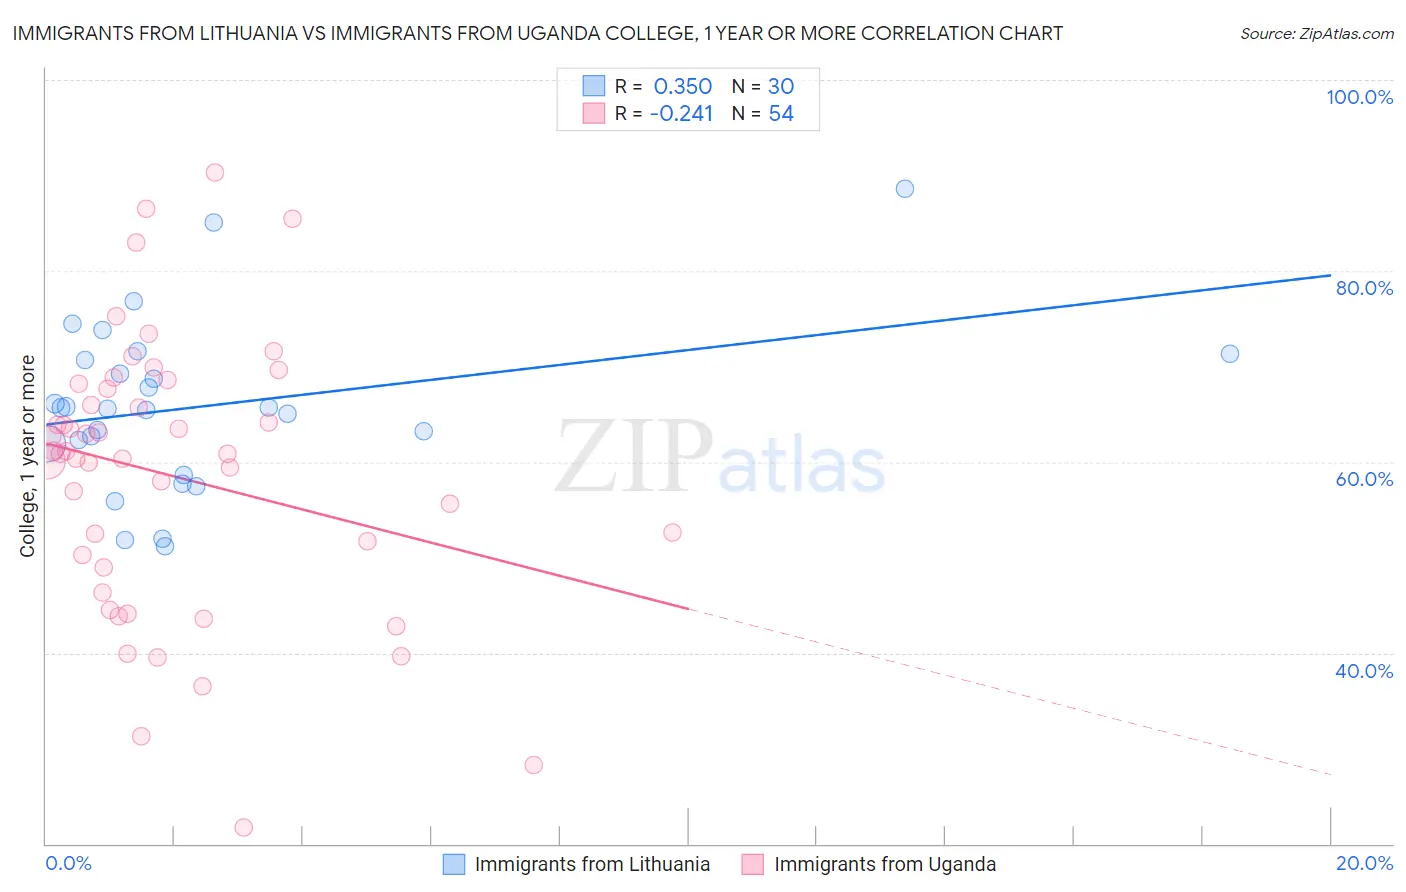 Immigrants from Lithuania vs Immigrants from Uganda College, 1 year or more